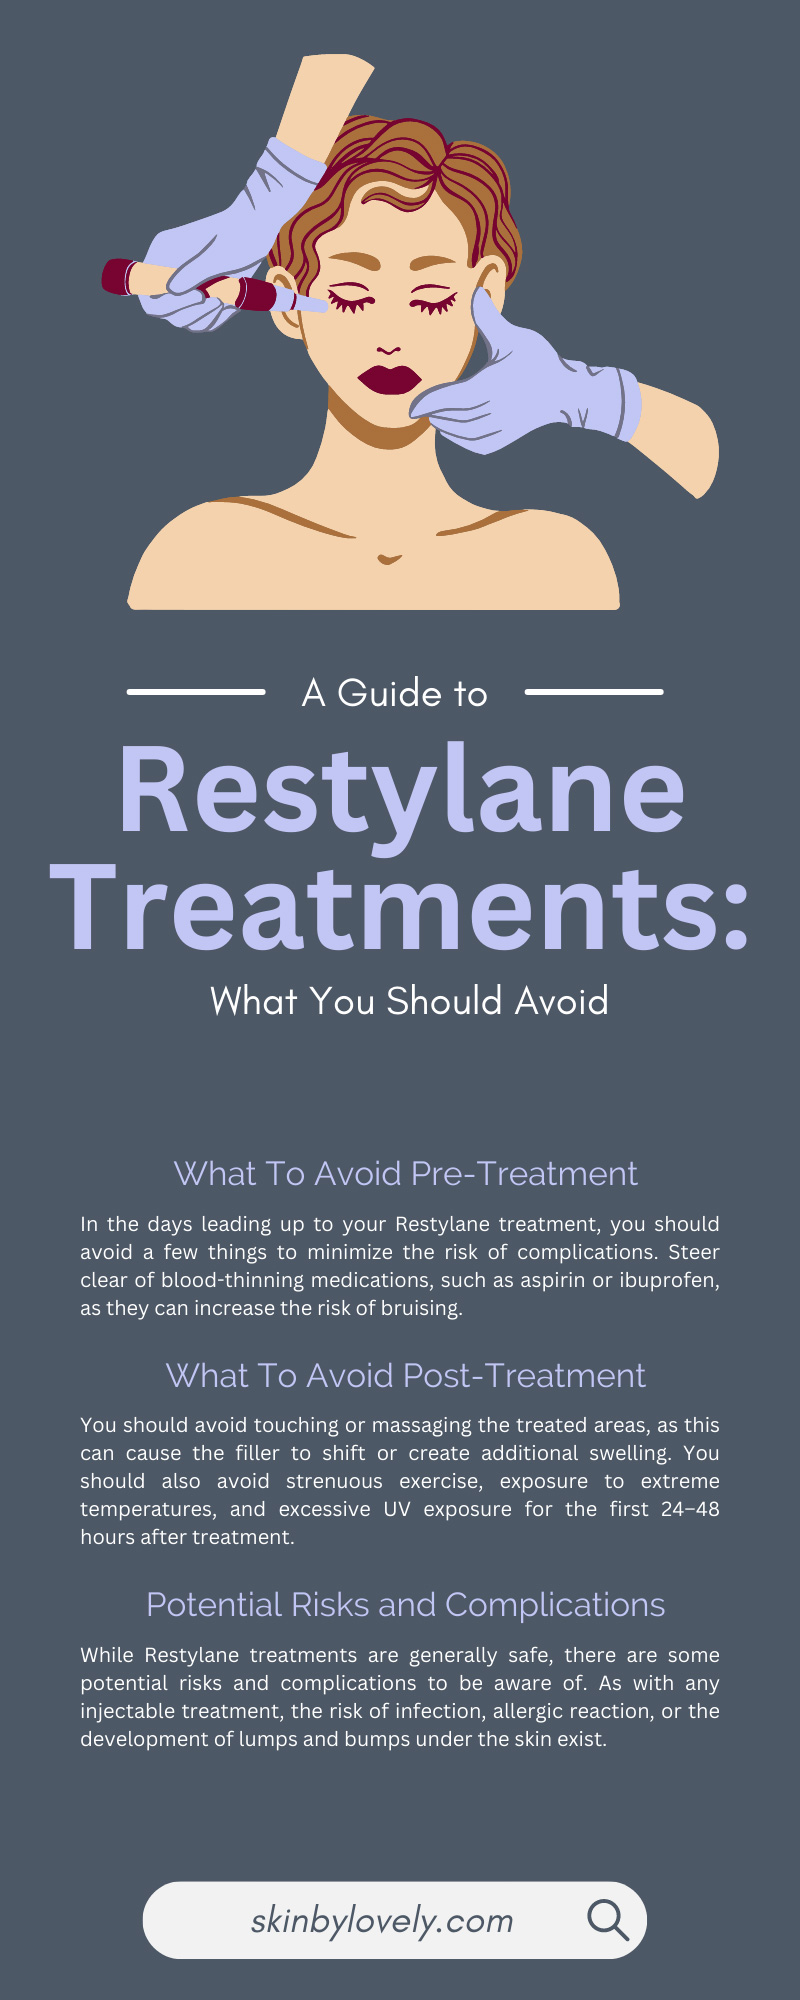 A Guide to Restylane Treatments: What You Should Avoid